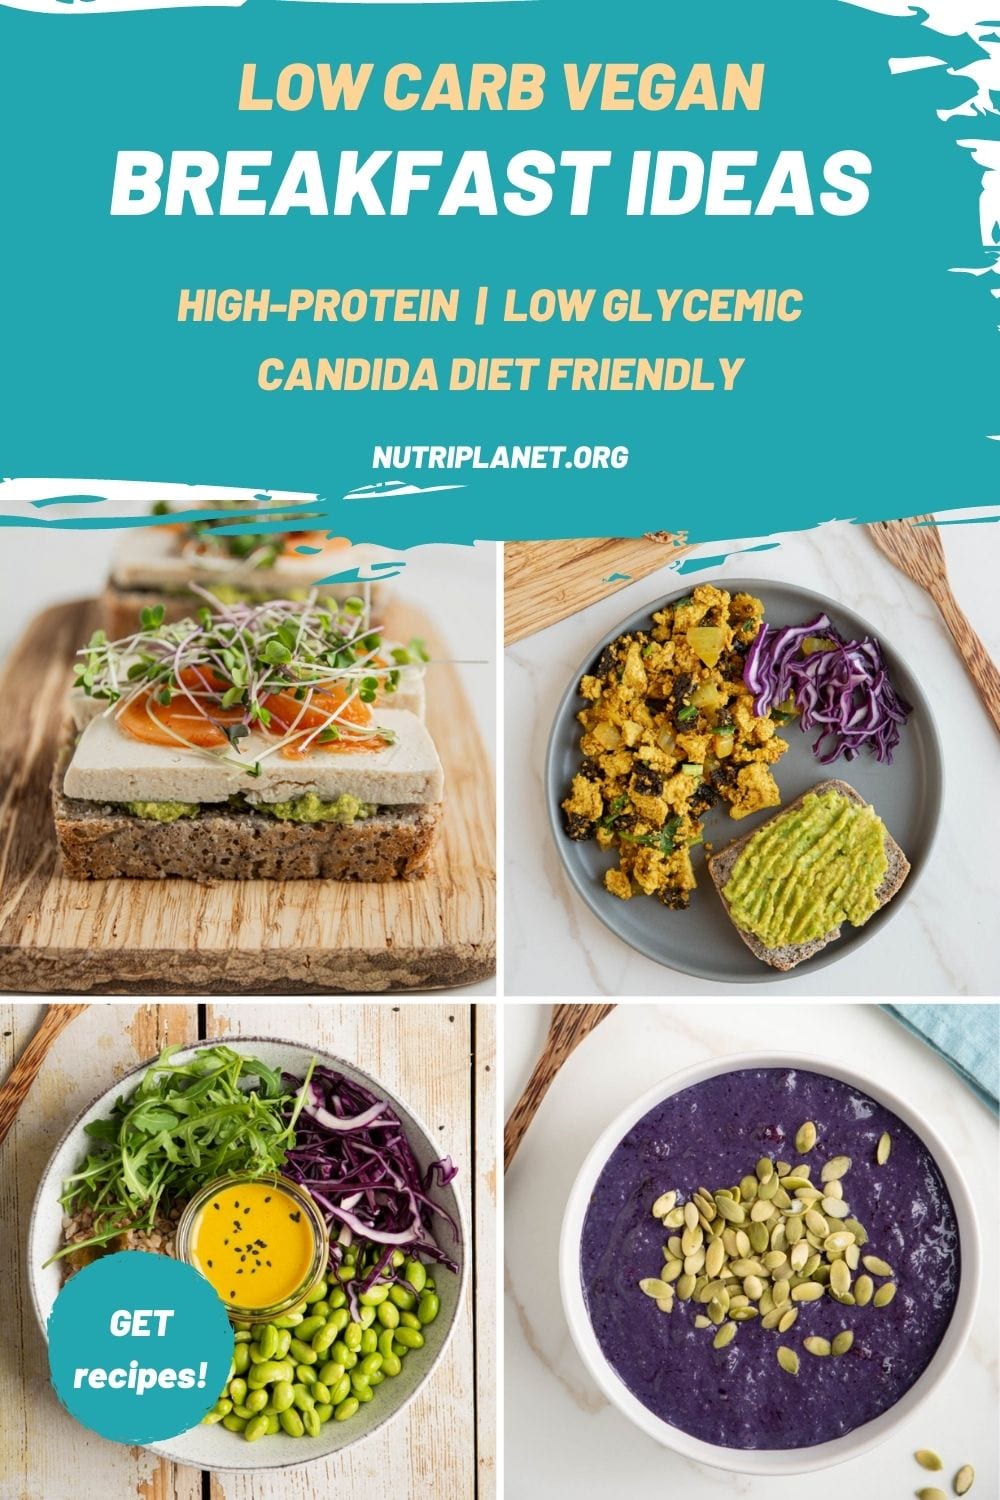 Learn how to make 4 low carb high-protein vegan breakfast ideas that are also high-protein, low glycemic, and vegan Candida diet friendly.